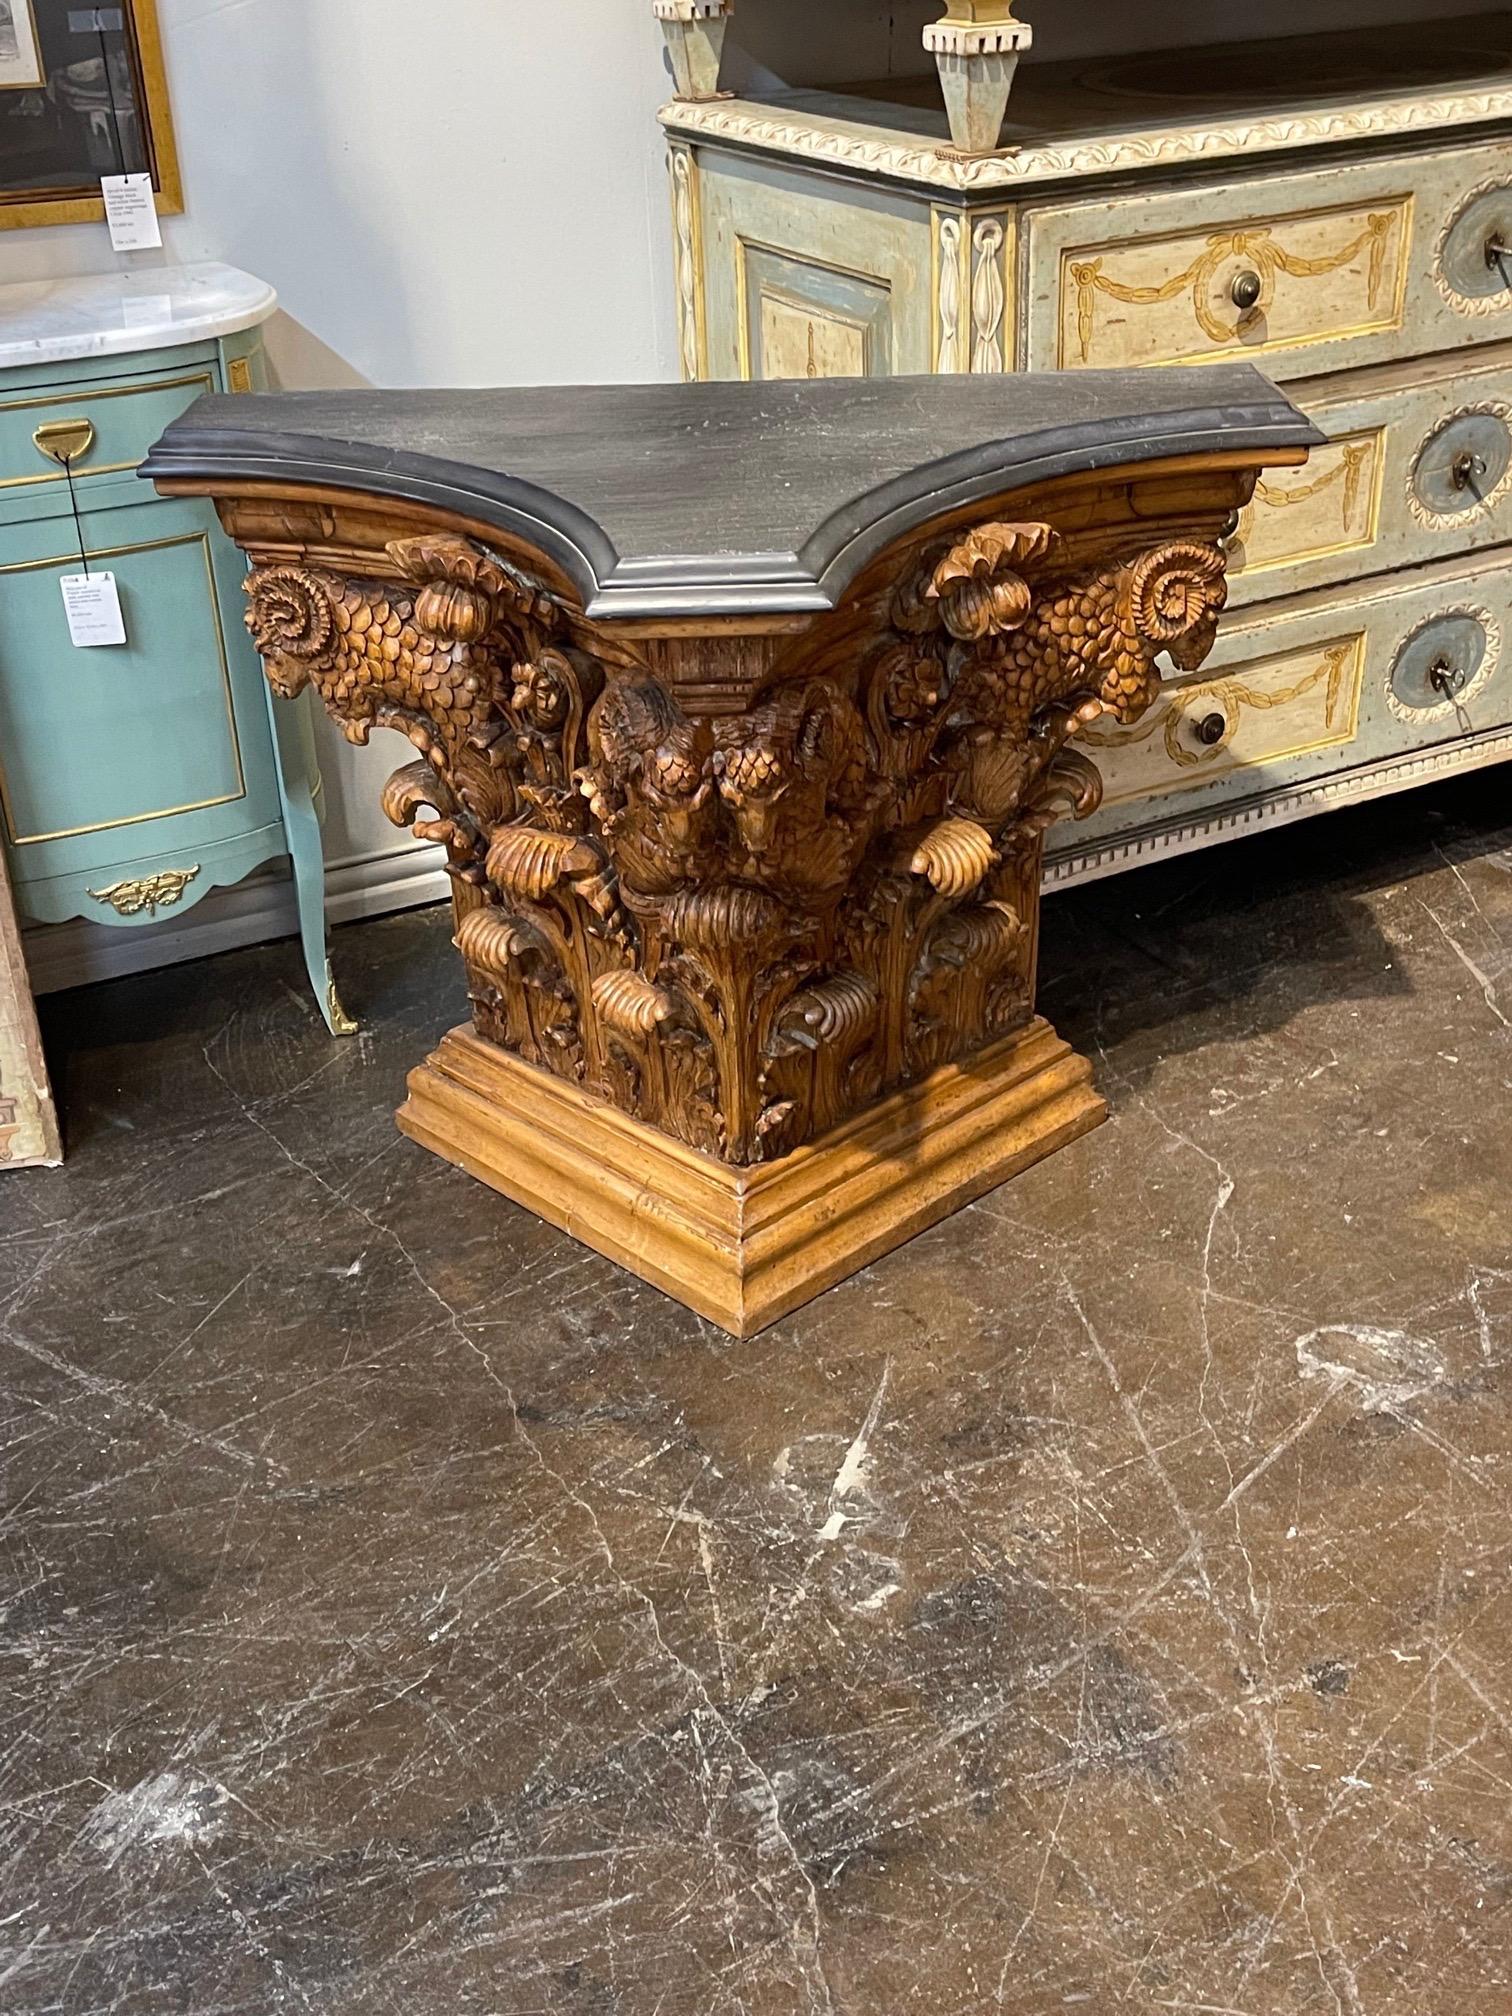 Handsome 19th century Austrian carved pine neo-classical console with slate top. Exceptional intricate carvings on this piece including Ram's heads. Stunning!.